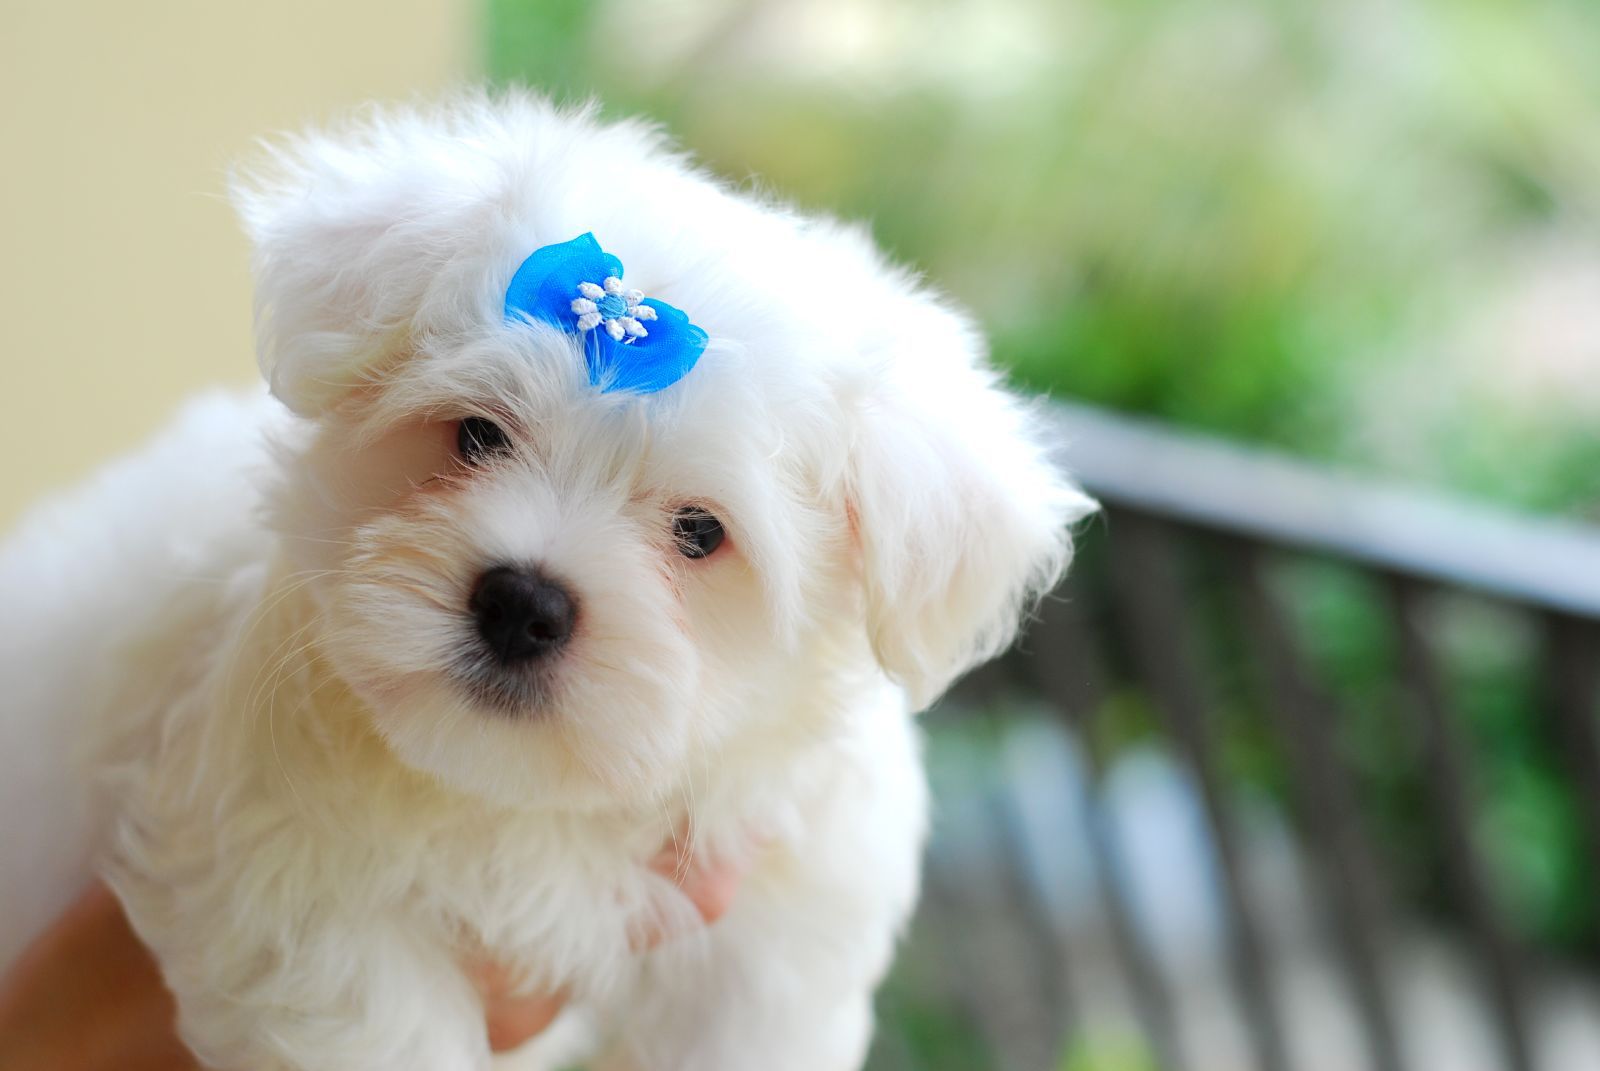 Small fluffy white dog with a blue bow